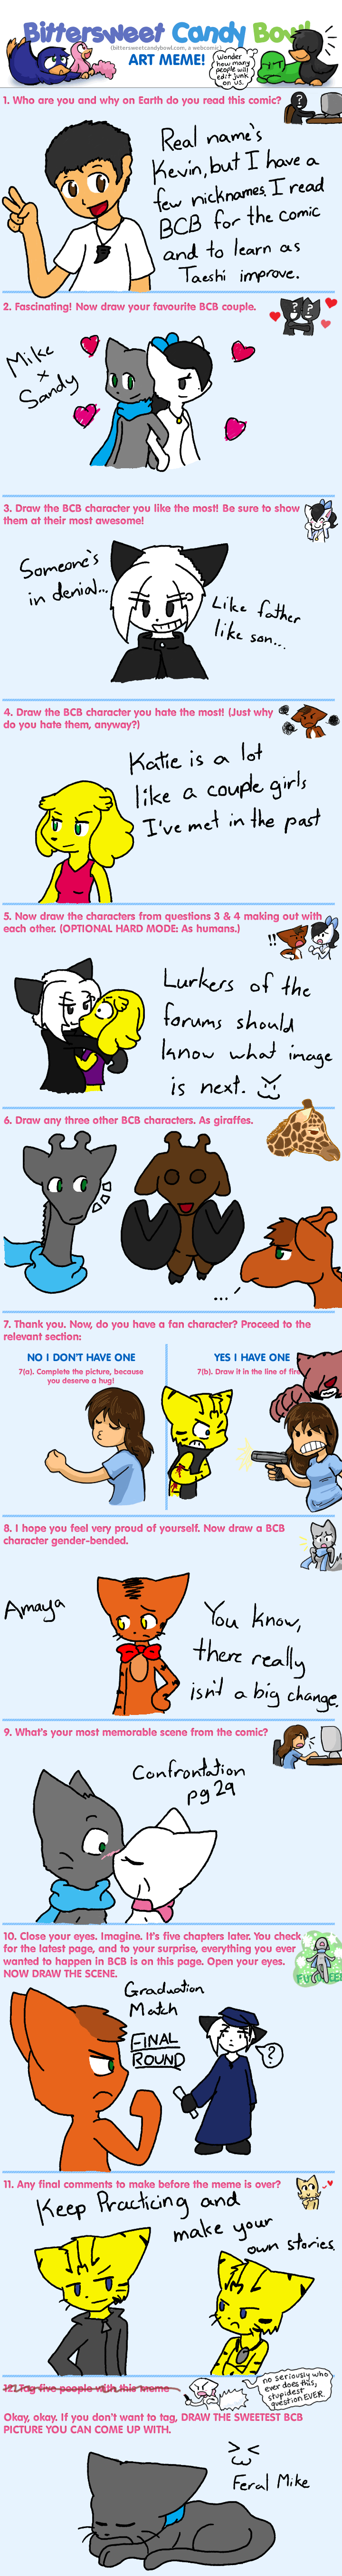 Candybooru image #1458, tagged with Abbey Amaya Augustus BCB_Art_Meme David Jack Katie Lucy Mike Sandy Suri Ved_the_Flame_Devil_(Artist) fancharacter meme